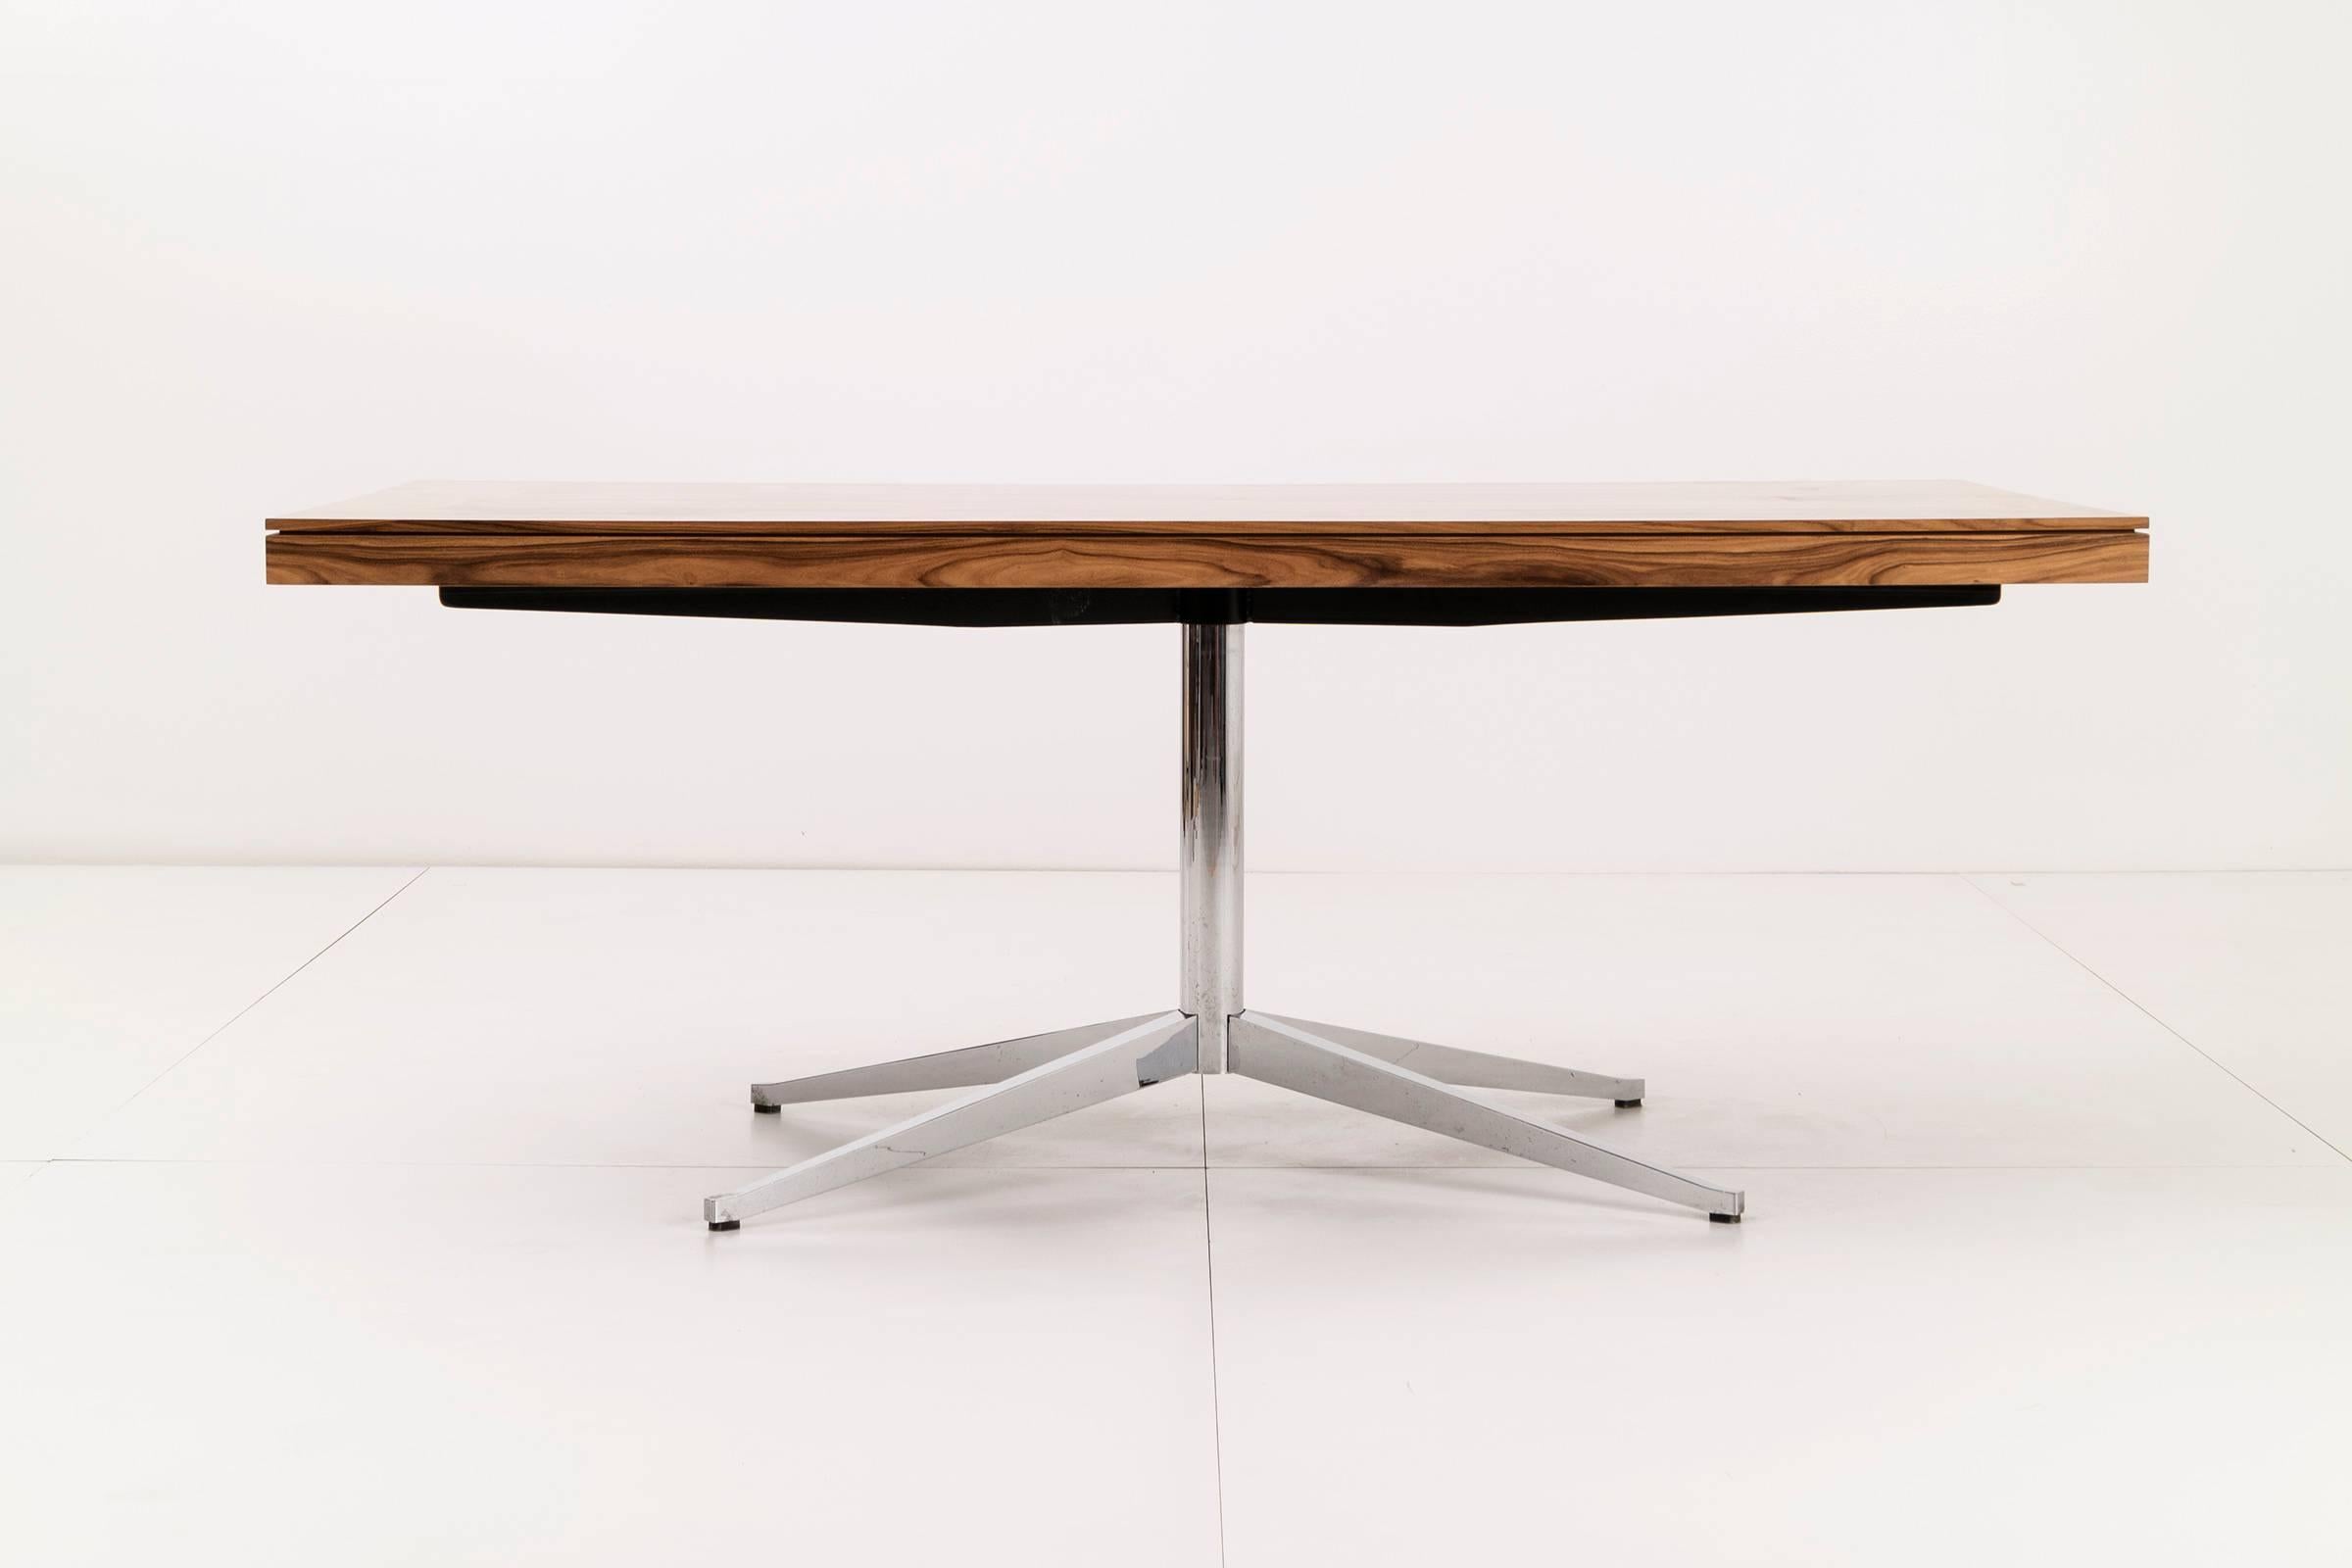 Florence knoll highly figured rosewood veneer desk with two pull-out drawers. Chrome-plated base.